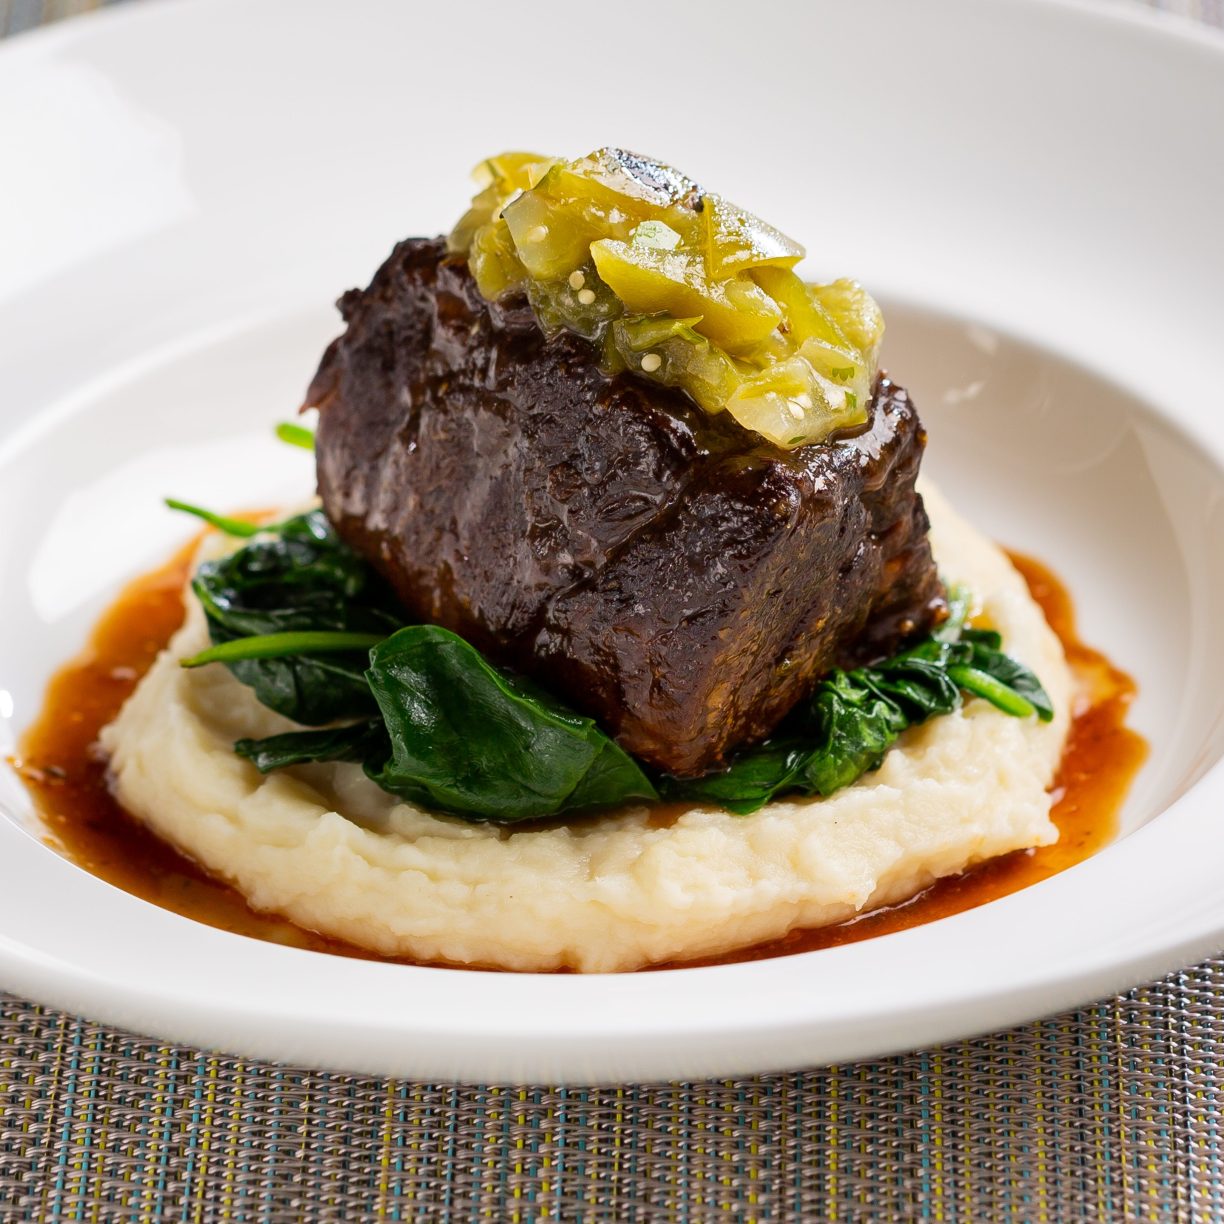 Cabernet Braised Beef Short Rib with Charred Green Tomato Salsa